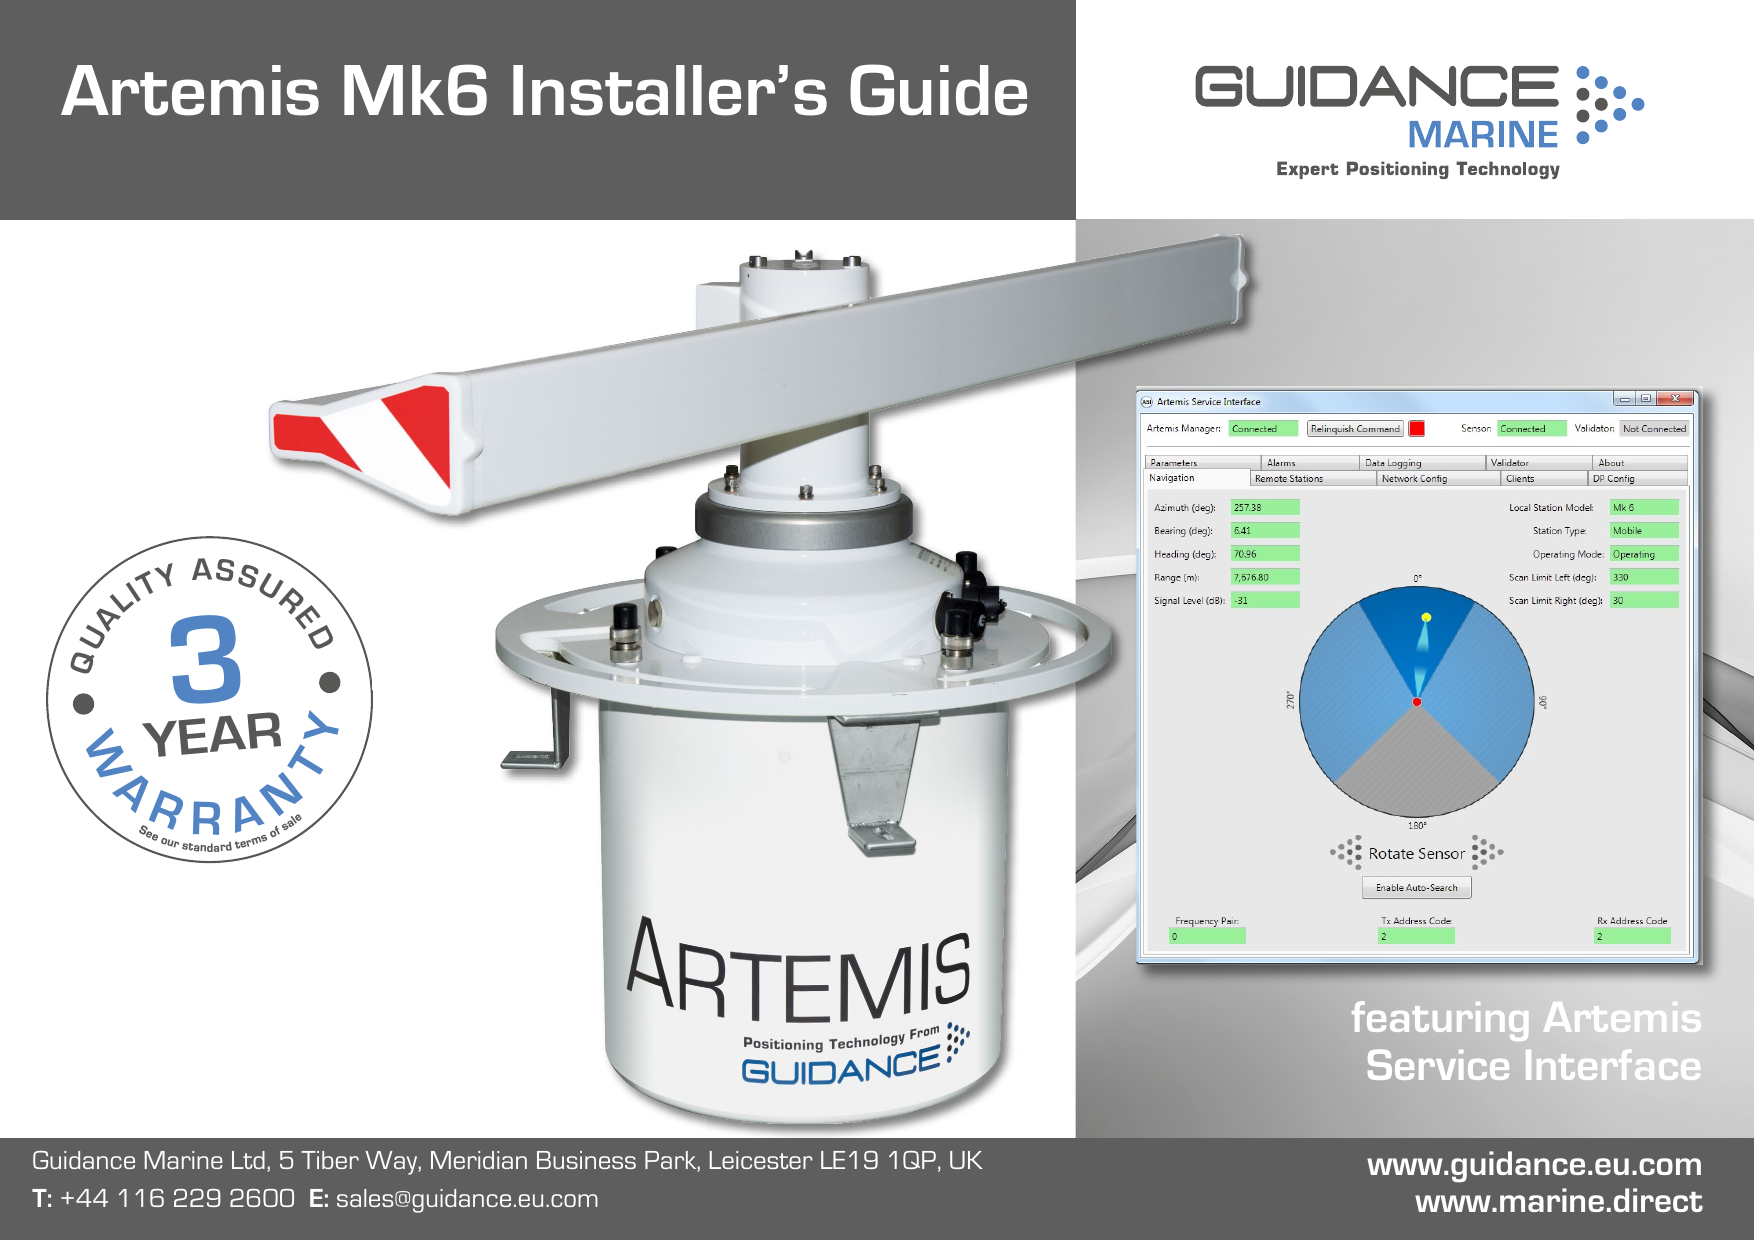 Guidance Marine Ltd, 5 Tiber Way, Meridian Business Park, Leicester LE19 1QP, UK T: +44 116 229 2600  E: sales@guidance.eu.comArtemis Mk6 Installer’s GuideWARRANTYSee our standard terms of saleQUALITY ASSURED3YEARfeaturing Artemis Service Interface www.guidance.eu.comwww.marine.direct